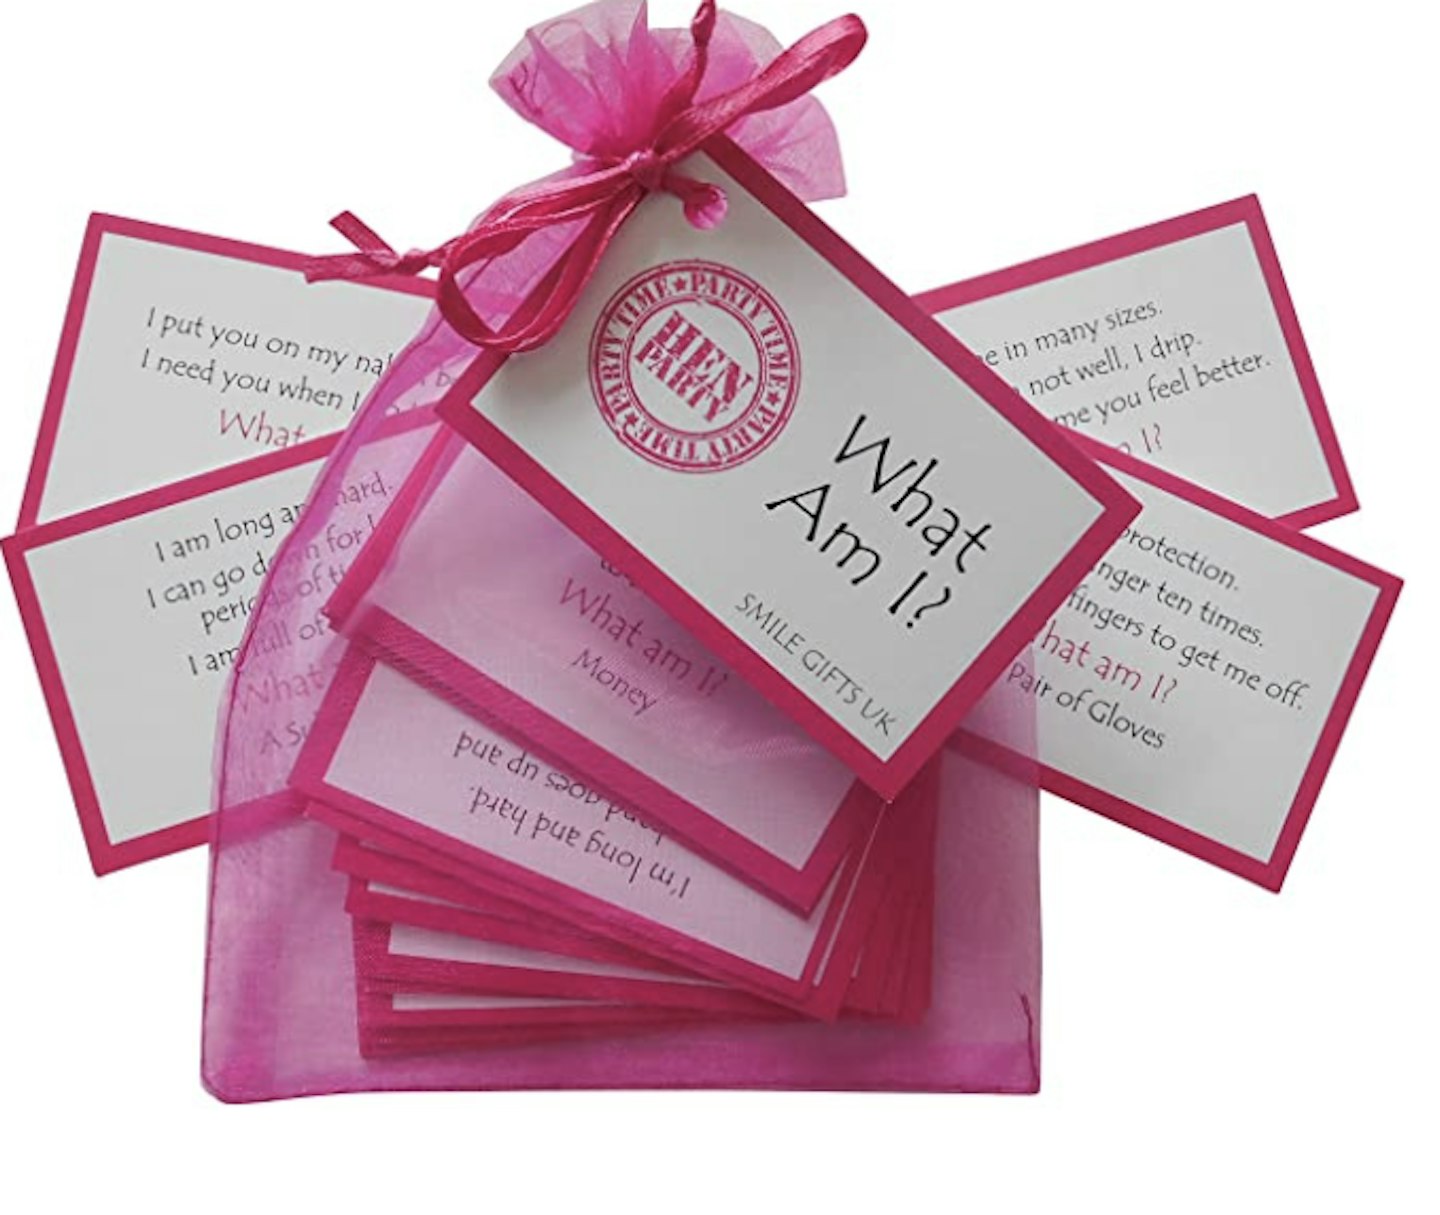 SMILE GIFTS UK Hen Party Game